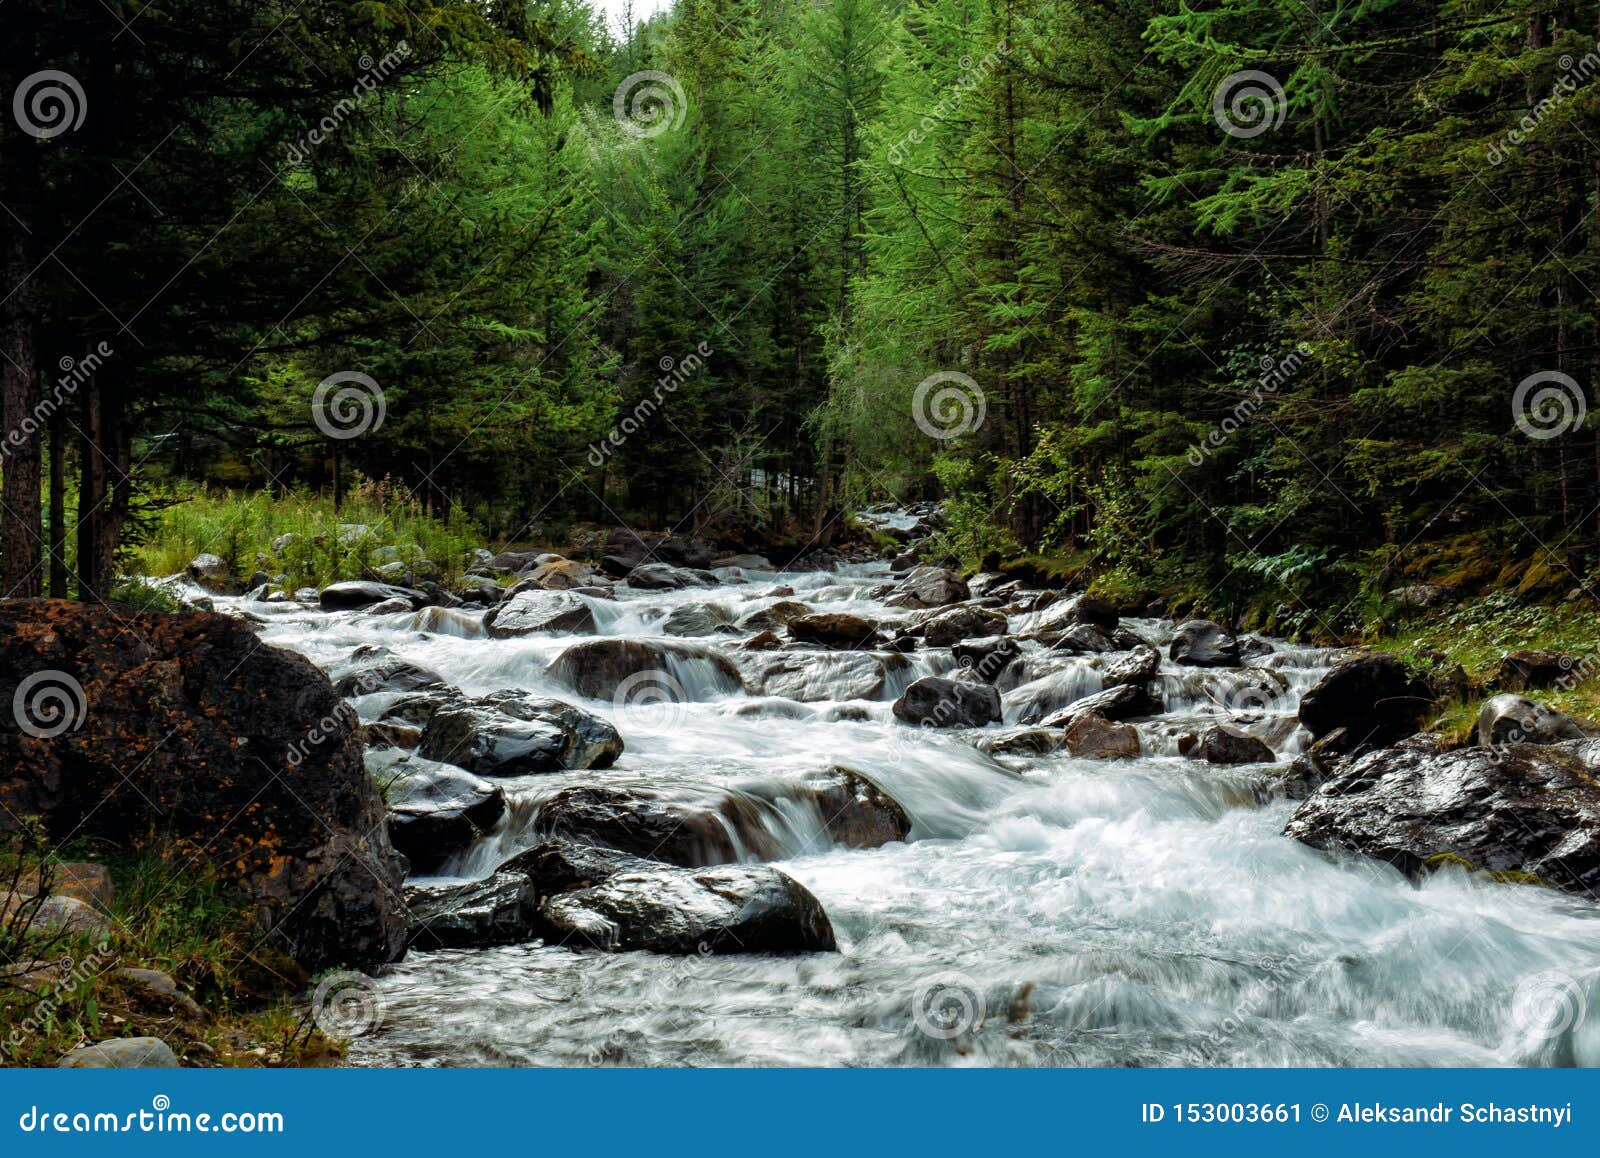 Rocky Mountain River Among The Pine Trees. Beautiful Fast ...